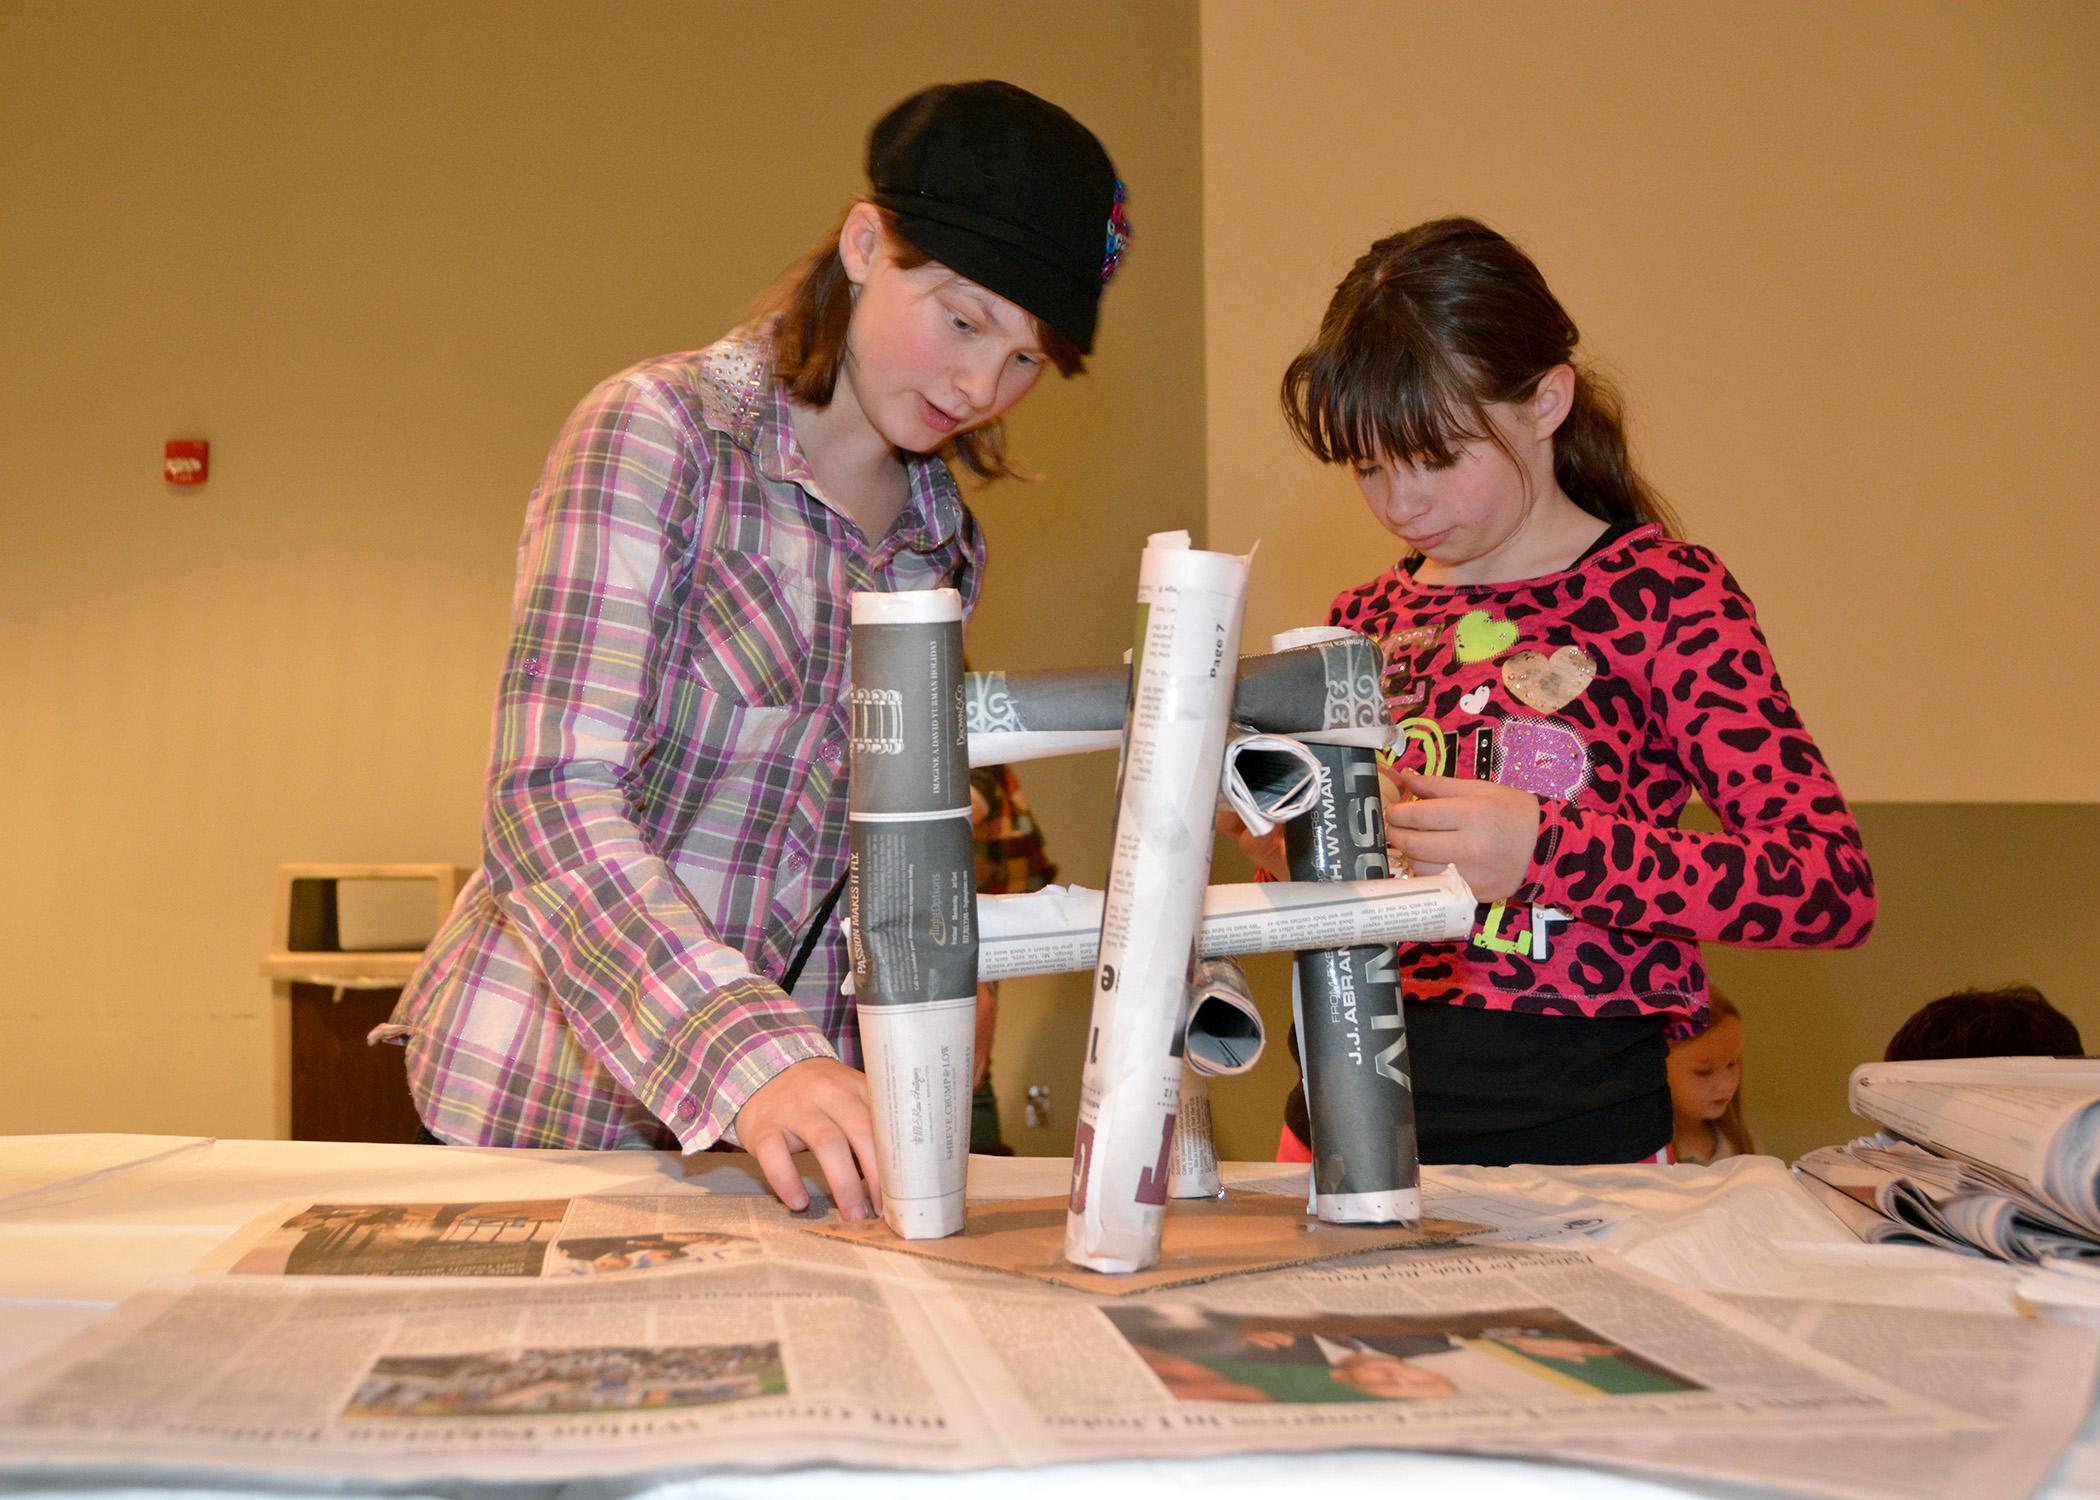 Lisa Cain, 11, and Mary Jane Cain, 10, use rolled-up newspaper to build a paper table at the Mississippi State University Mechanical Engineering Service Learning Showcase Nov. 20. 4-H members tested educational projects developed by MSU students in partnership with MSU’s Center for the Advancement of Service-Learning Excellence. (Photo by MSU Ag Communications/Bonnie Coblentz)